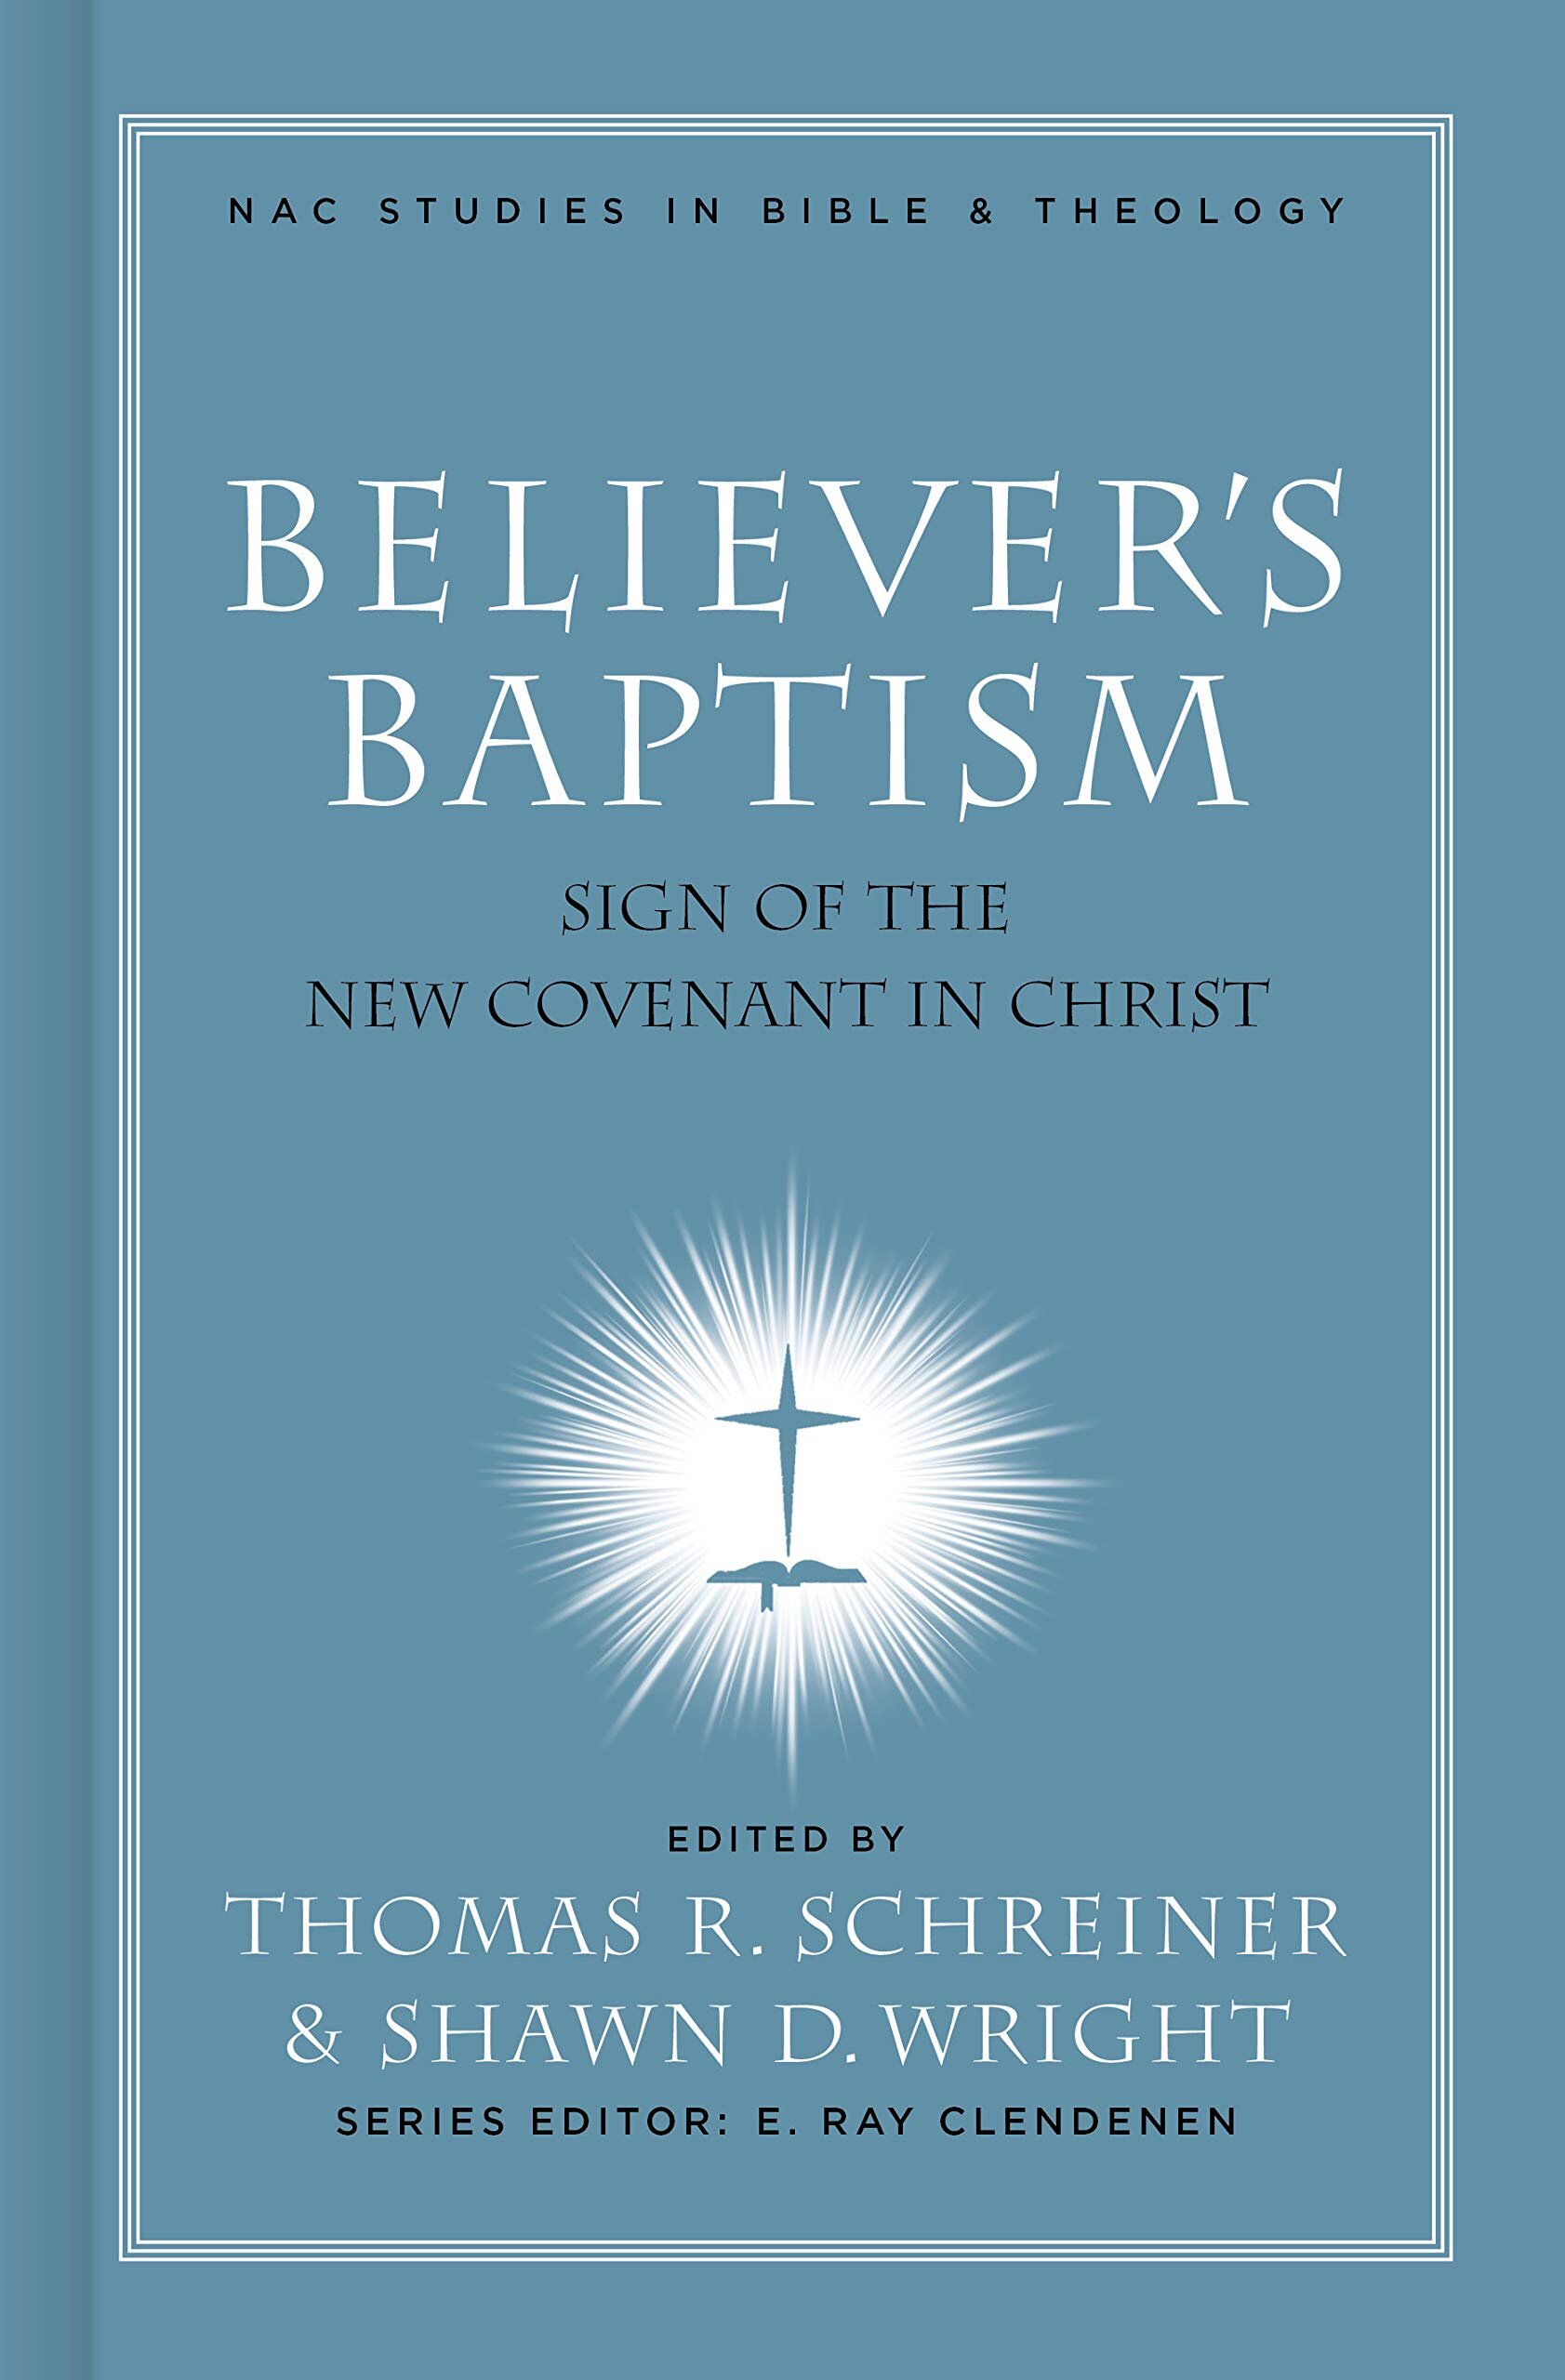 Believer’s Baptism: The Covenant Sign of the New Age in Christ (NAC Studies in Bible and Theology)